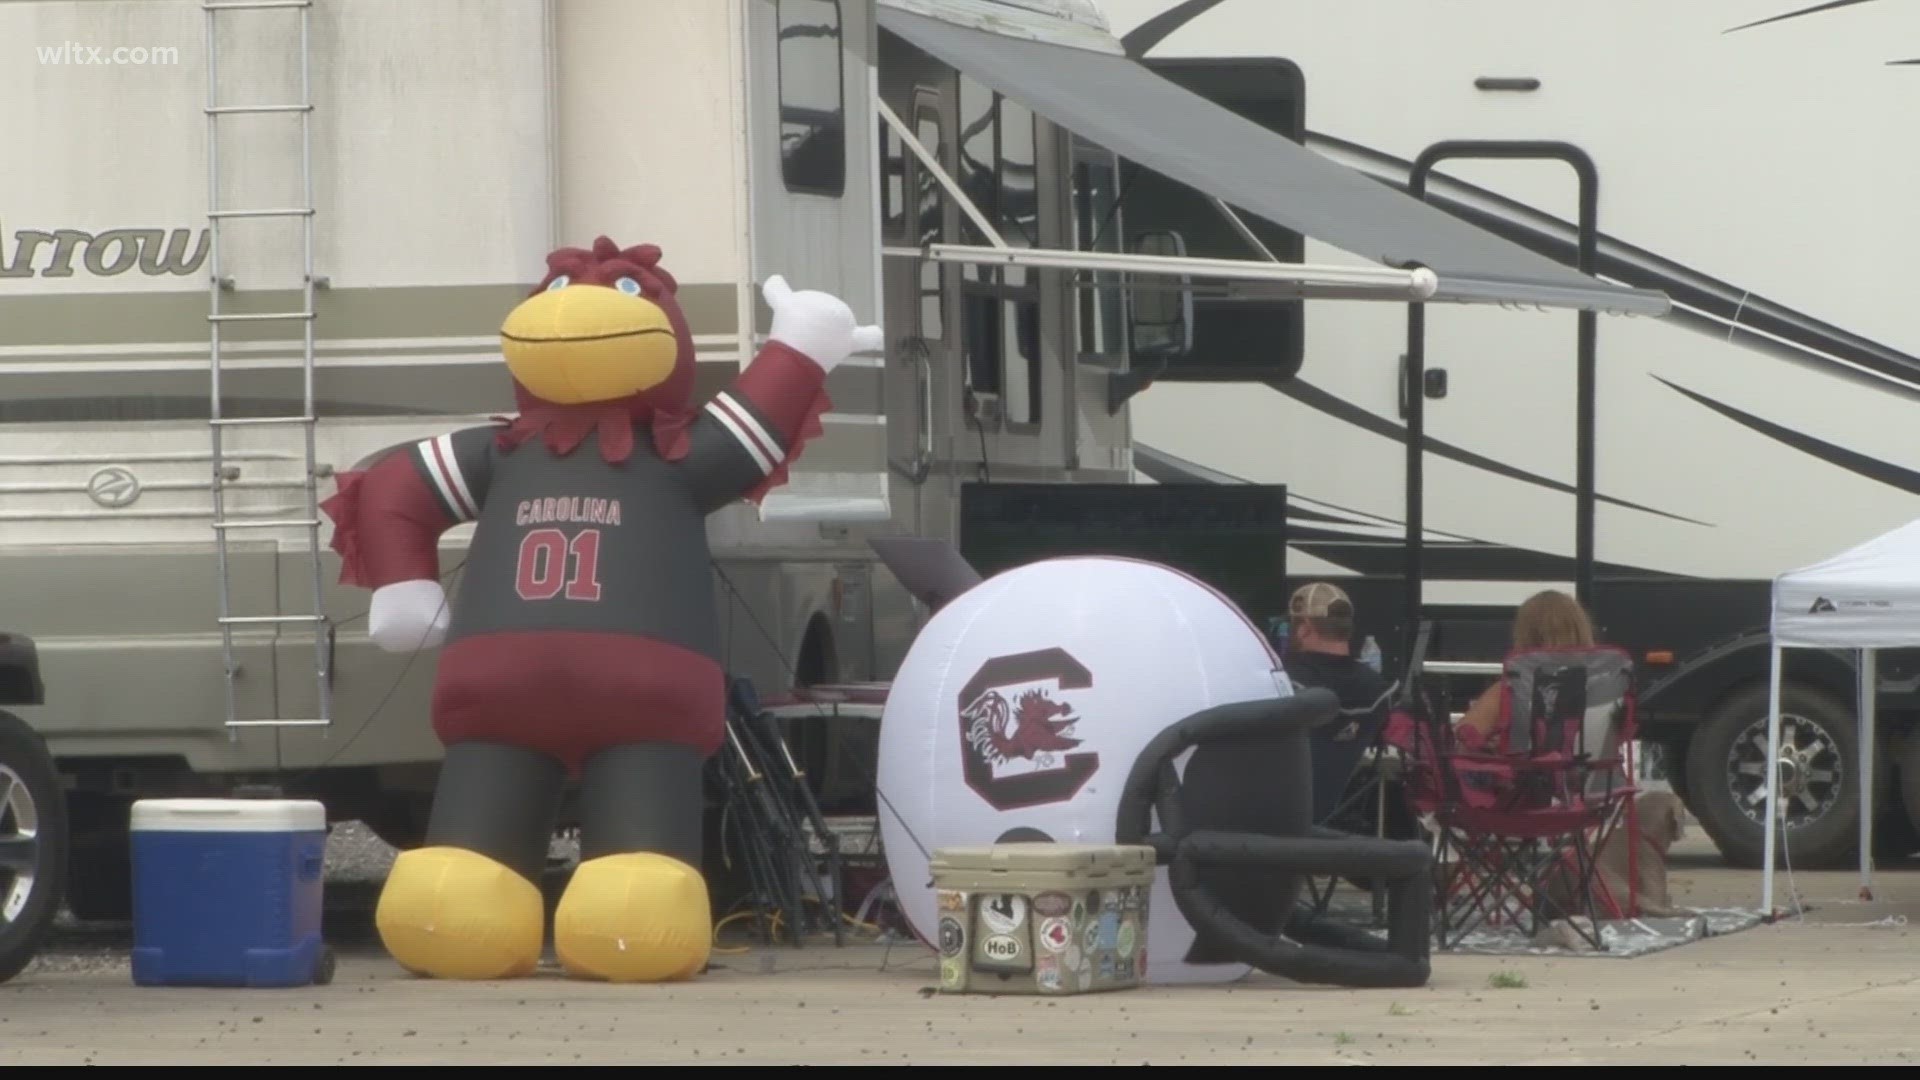 After a solid end to the 2022 season, fans poured into Williams-Bruce to cheer on the Gamecocks. Local vendors say they've seen record-high fan turnout.